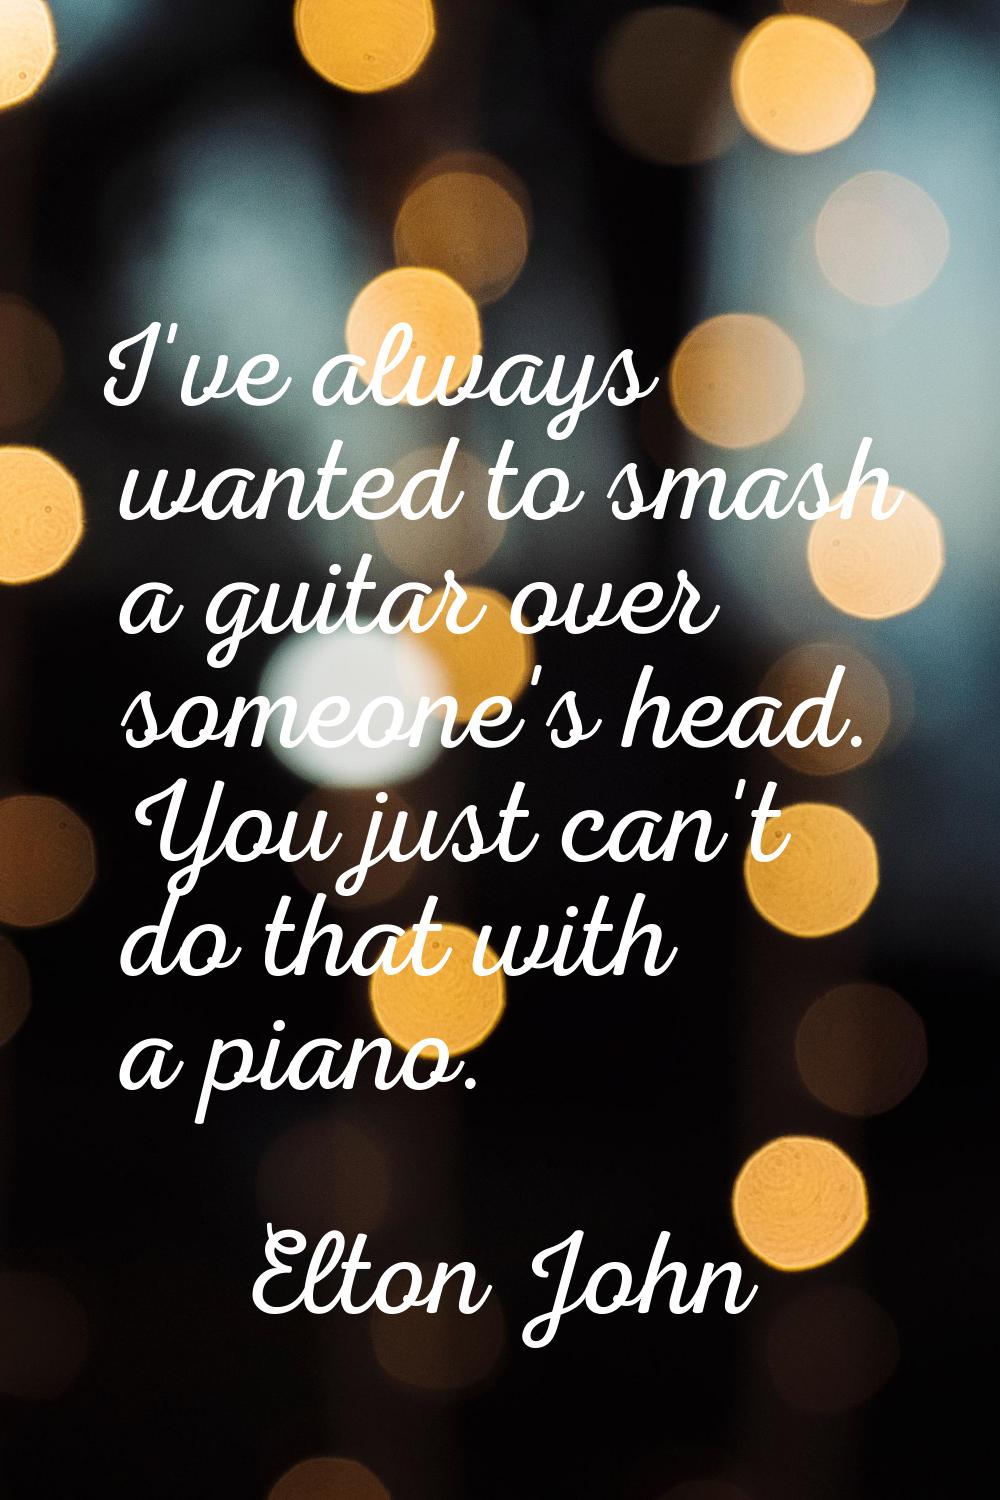 I've always wanted to smash a guitar over someone's head. You just can't do that with a piano.